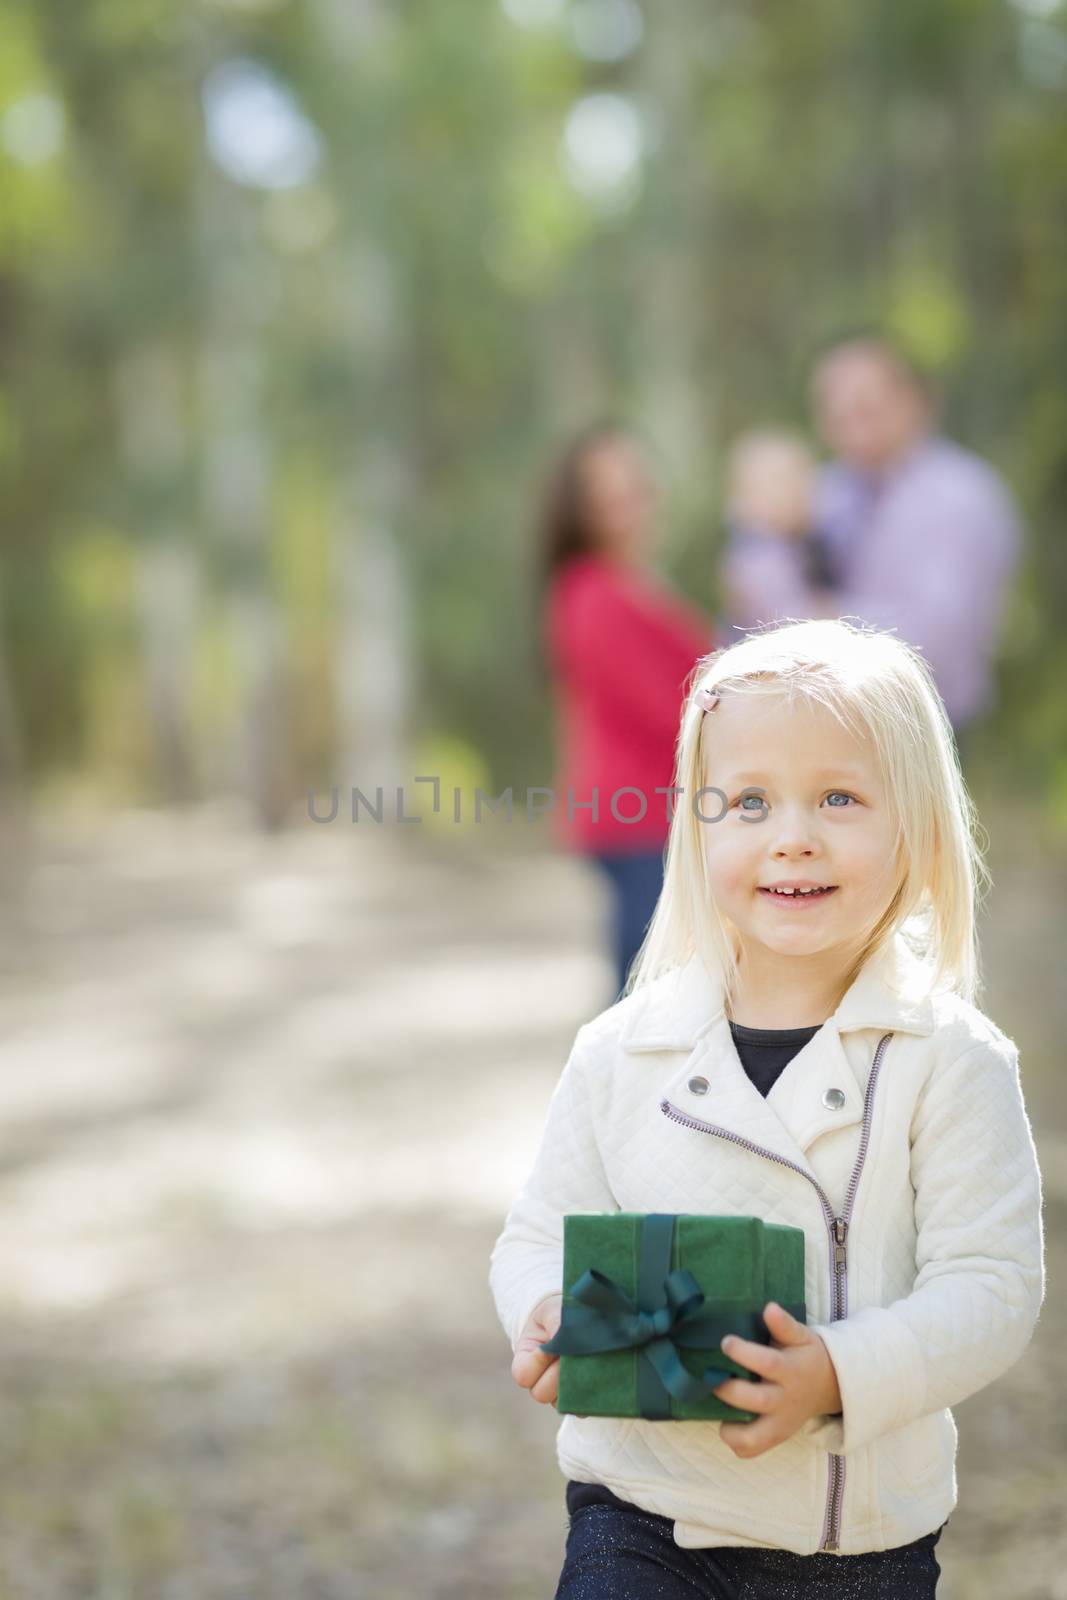 Baby Girl With Christmas Gift Outdoors Parents Behind by Feverpitched